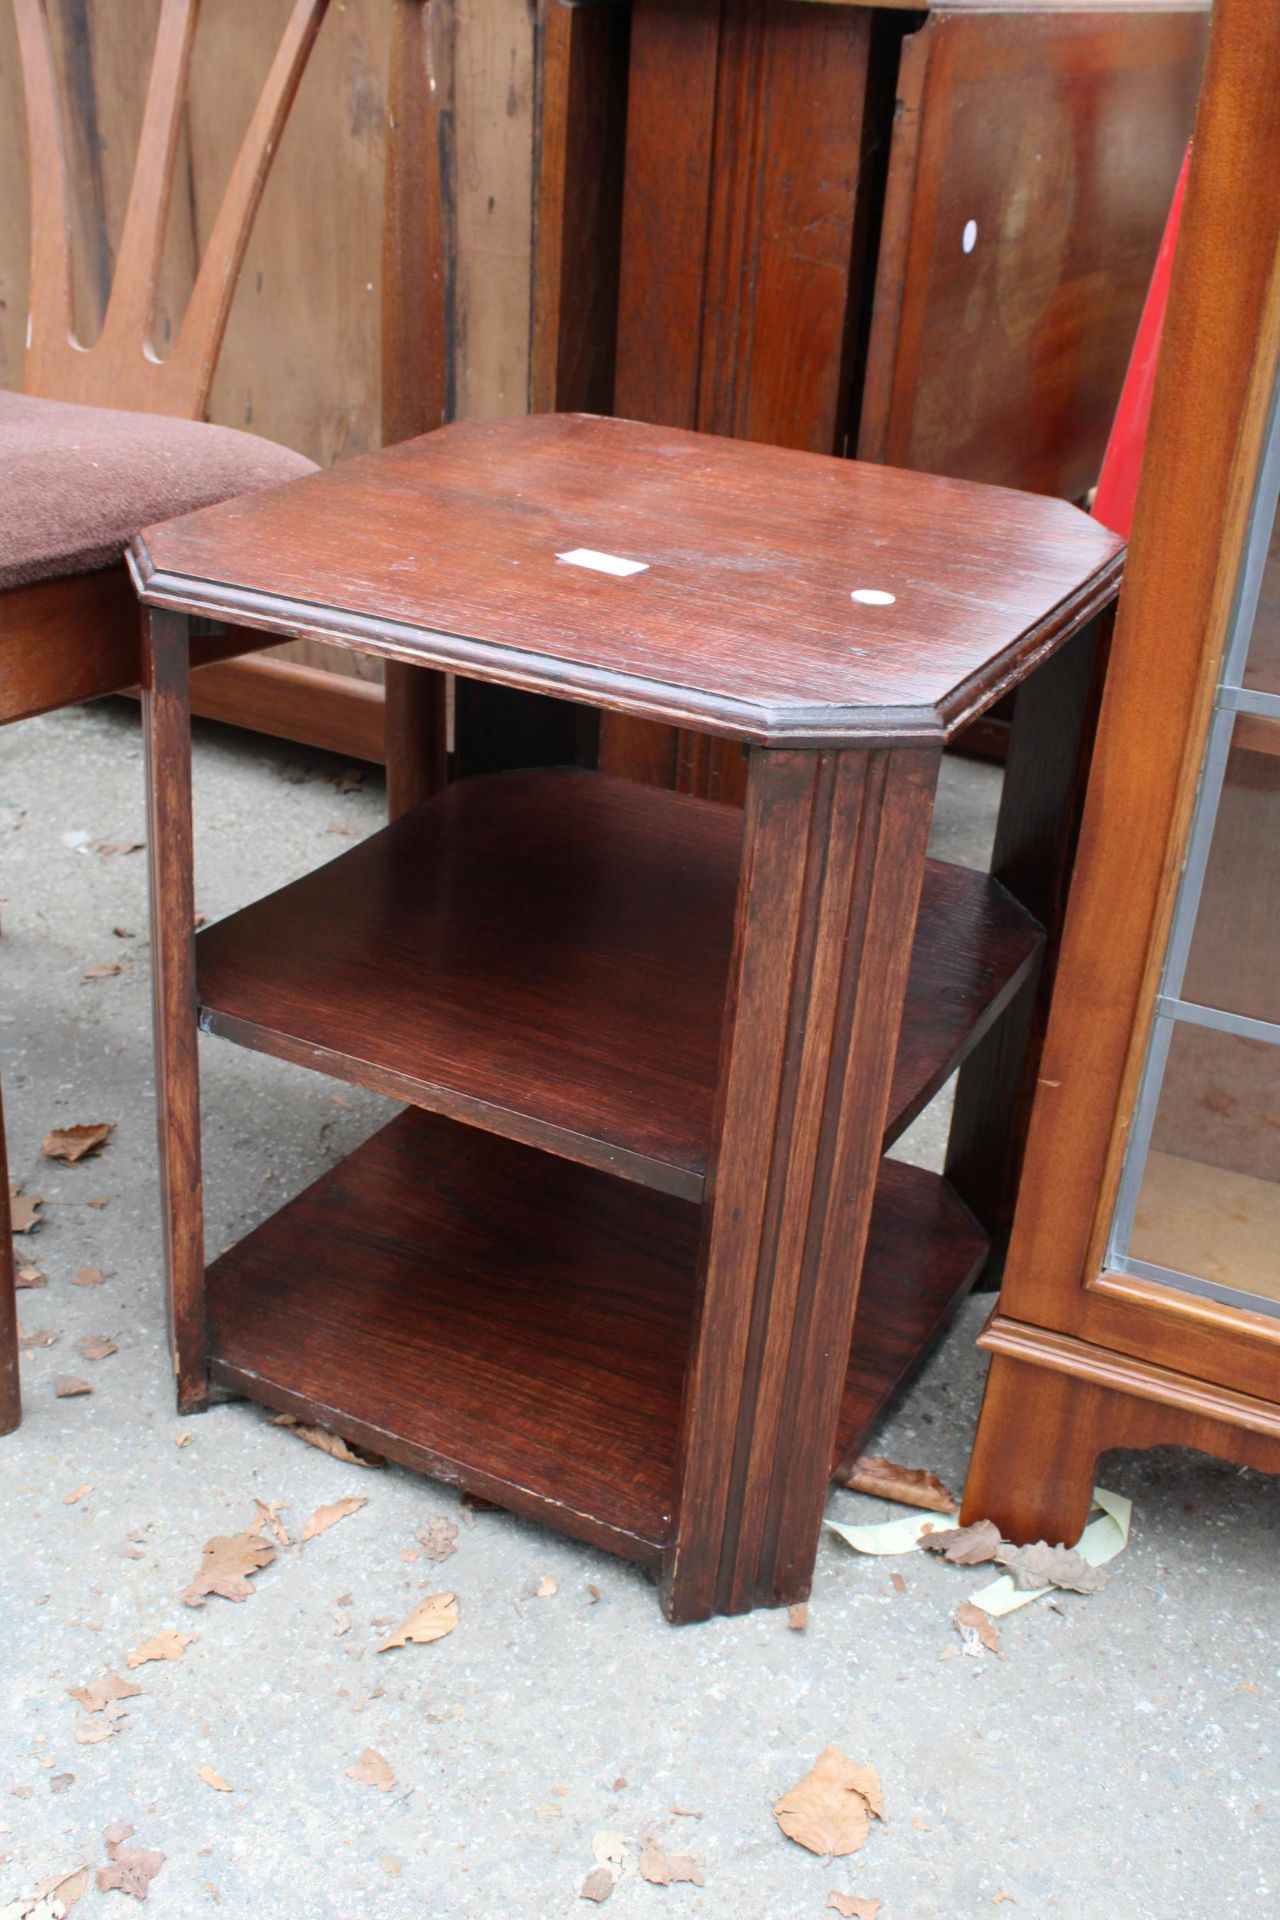 A MID 20TH CENTURY THREE TIER TABLE WITH CANTED CORNERS 16" SQUARE AND RETRO TEAK CARVED CHAIR - Image 2 of 2